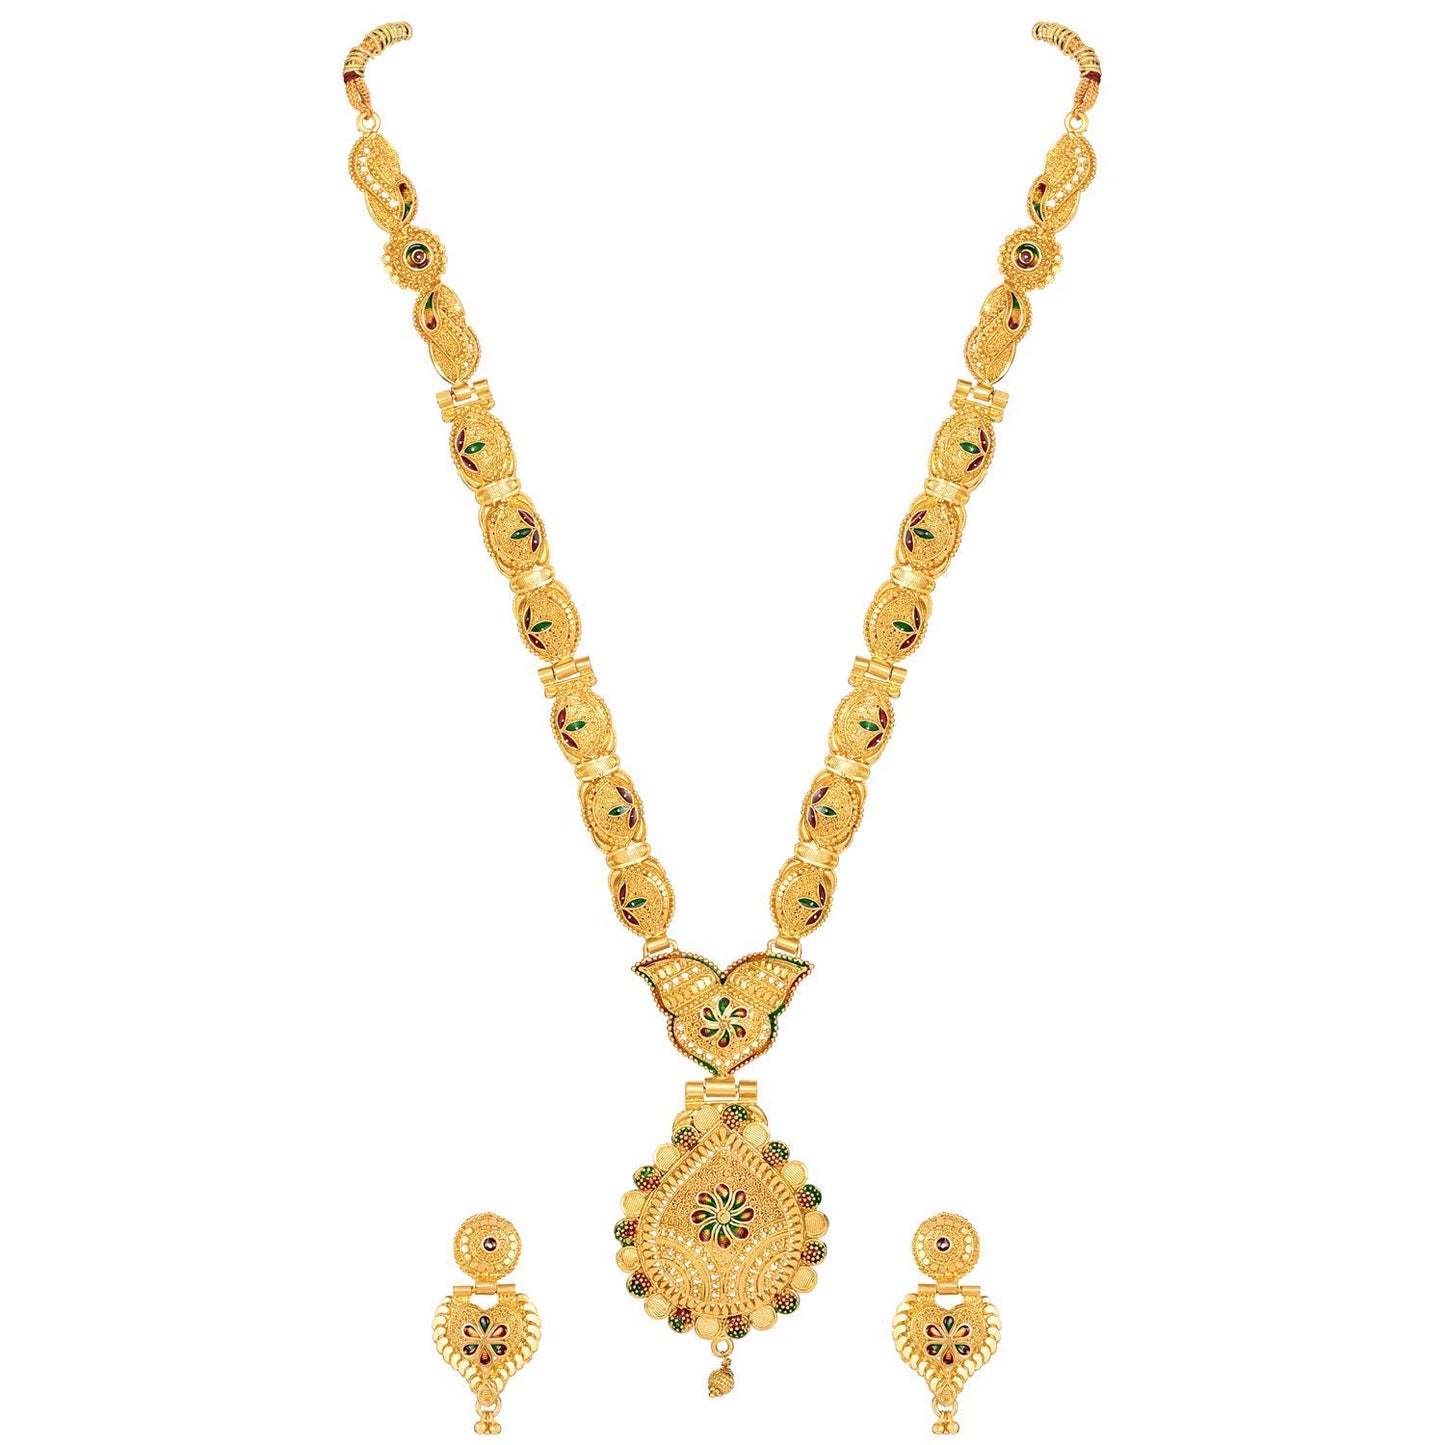 Shining Diva Fashion Latest Long Design Necklace Set For Women Traditional One Gram Gold Plated Jewellery (Golden) (11503s)